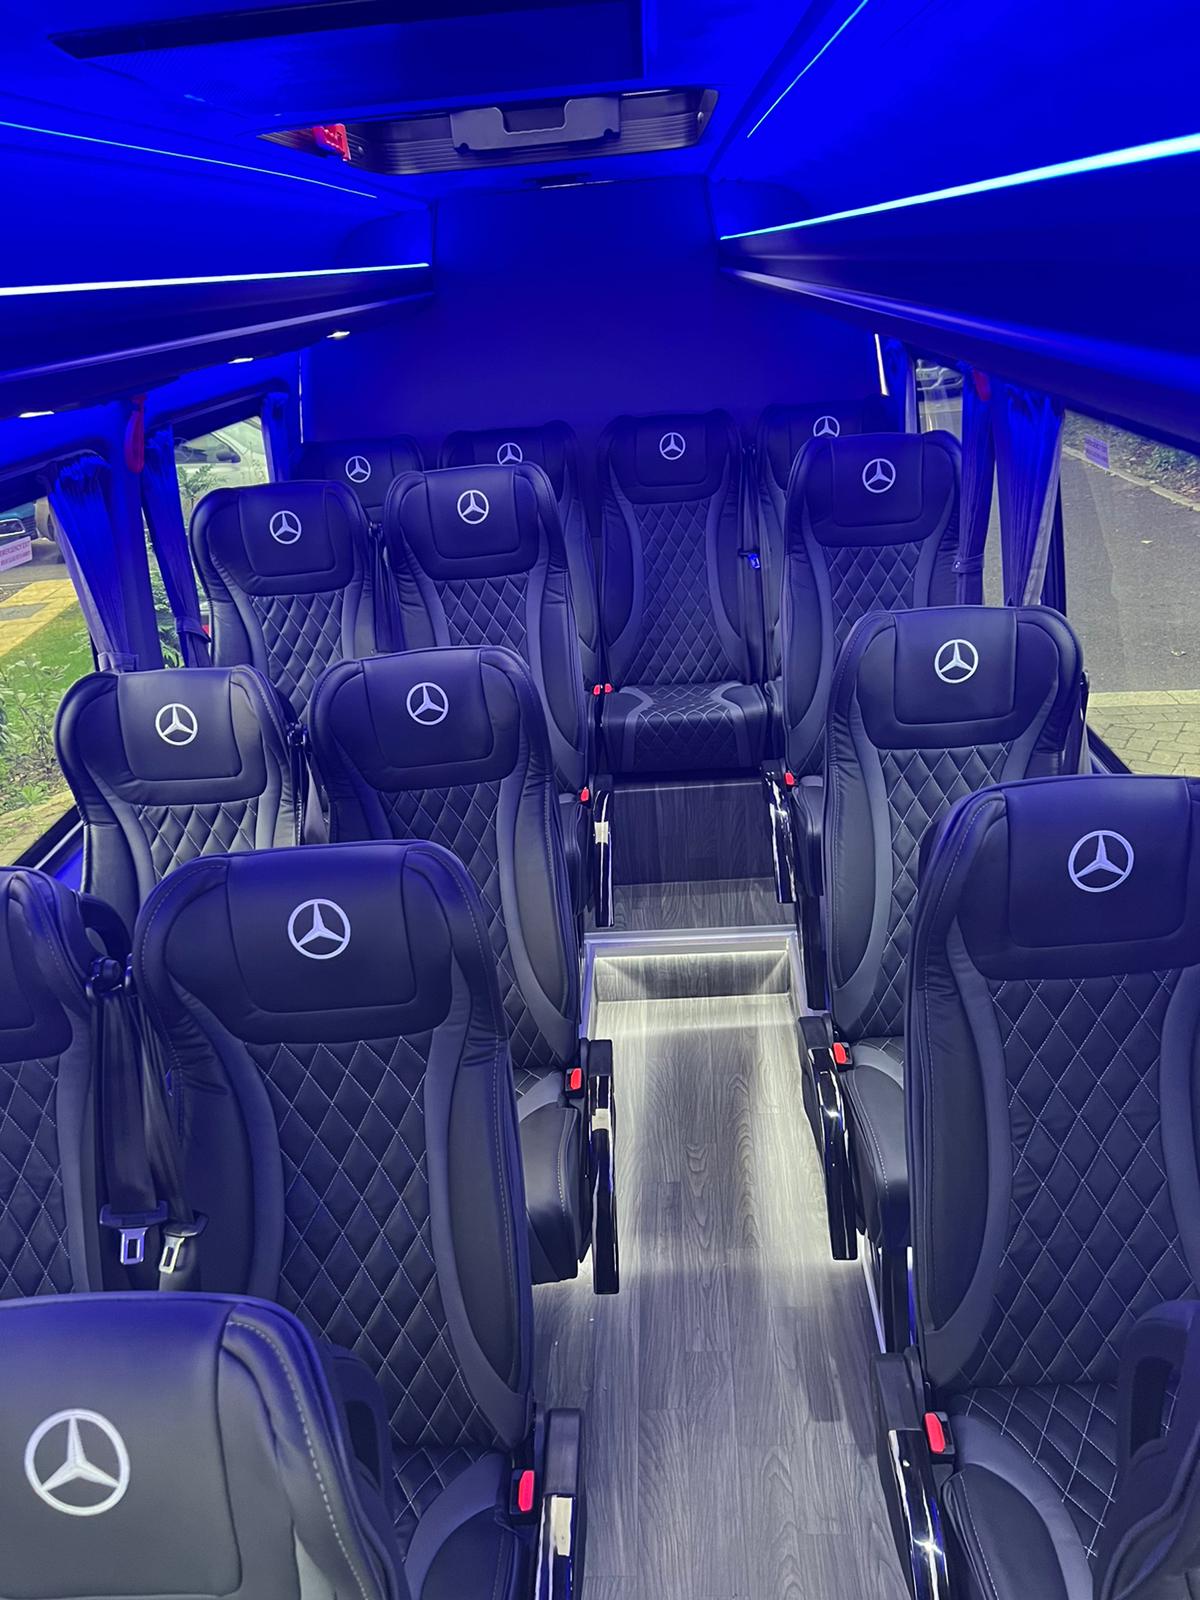 The Ultimate Guide to Hiring a 16 Seater Minibus for Your Next UK Event